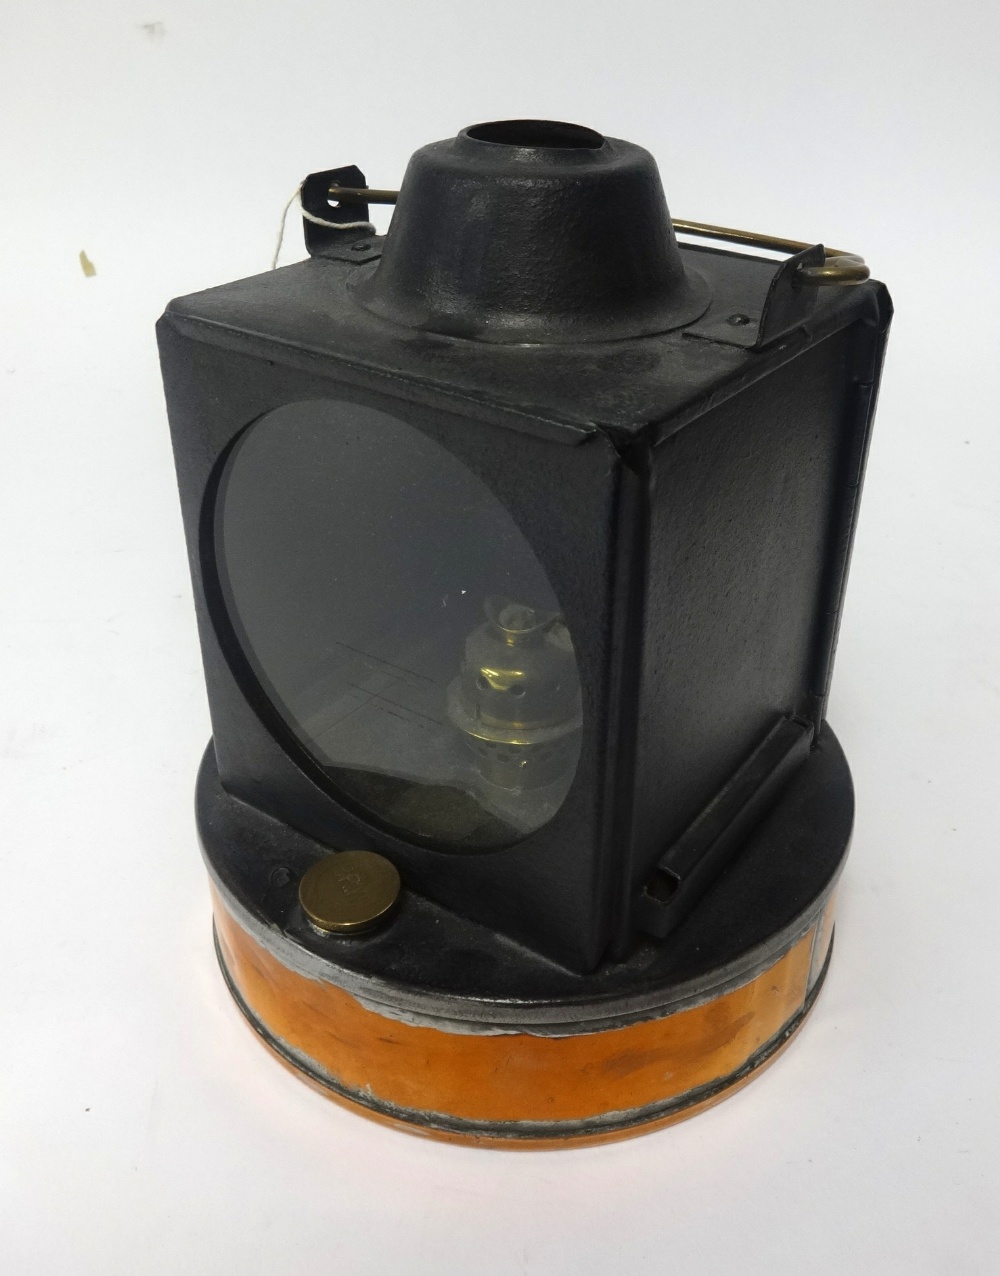 A Railway portable Oil Lamp, round copper base, embossed Sherwoods Ltd Bham, on wick adjuster